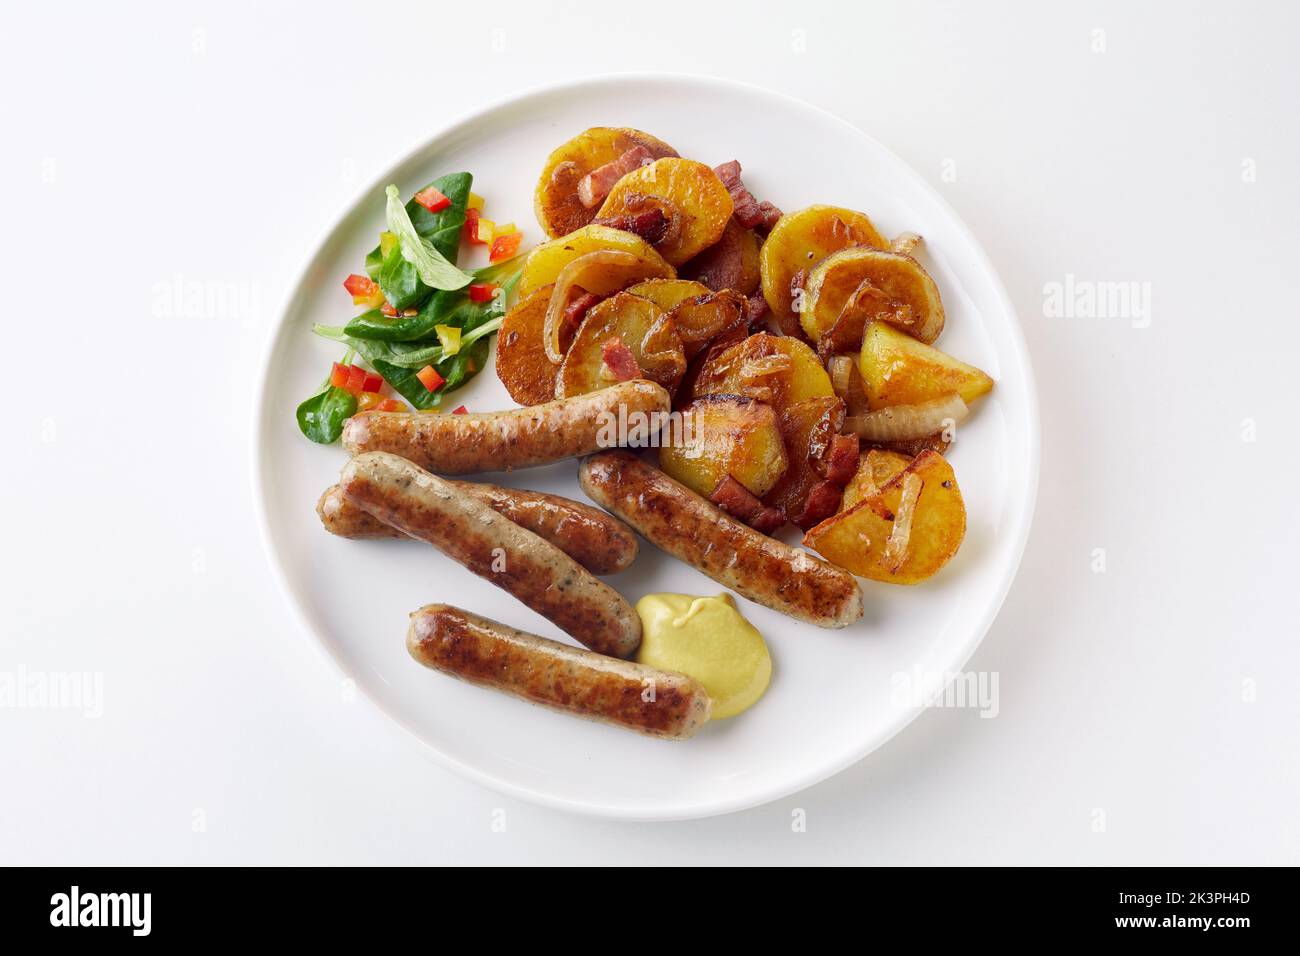 Top view of yummy German bratkartoffeln and bratwurst served for lunch with vegetable salad and mustard sauce on plate on white background Stock Photo